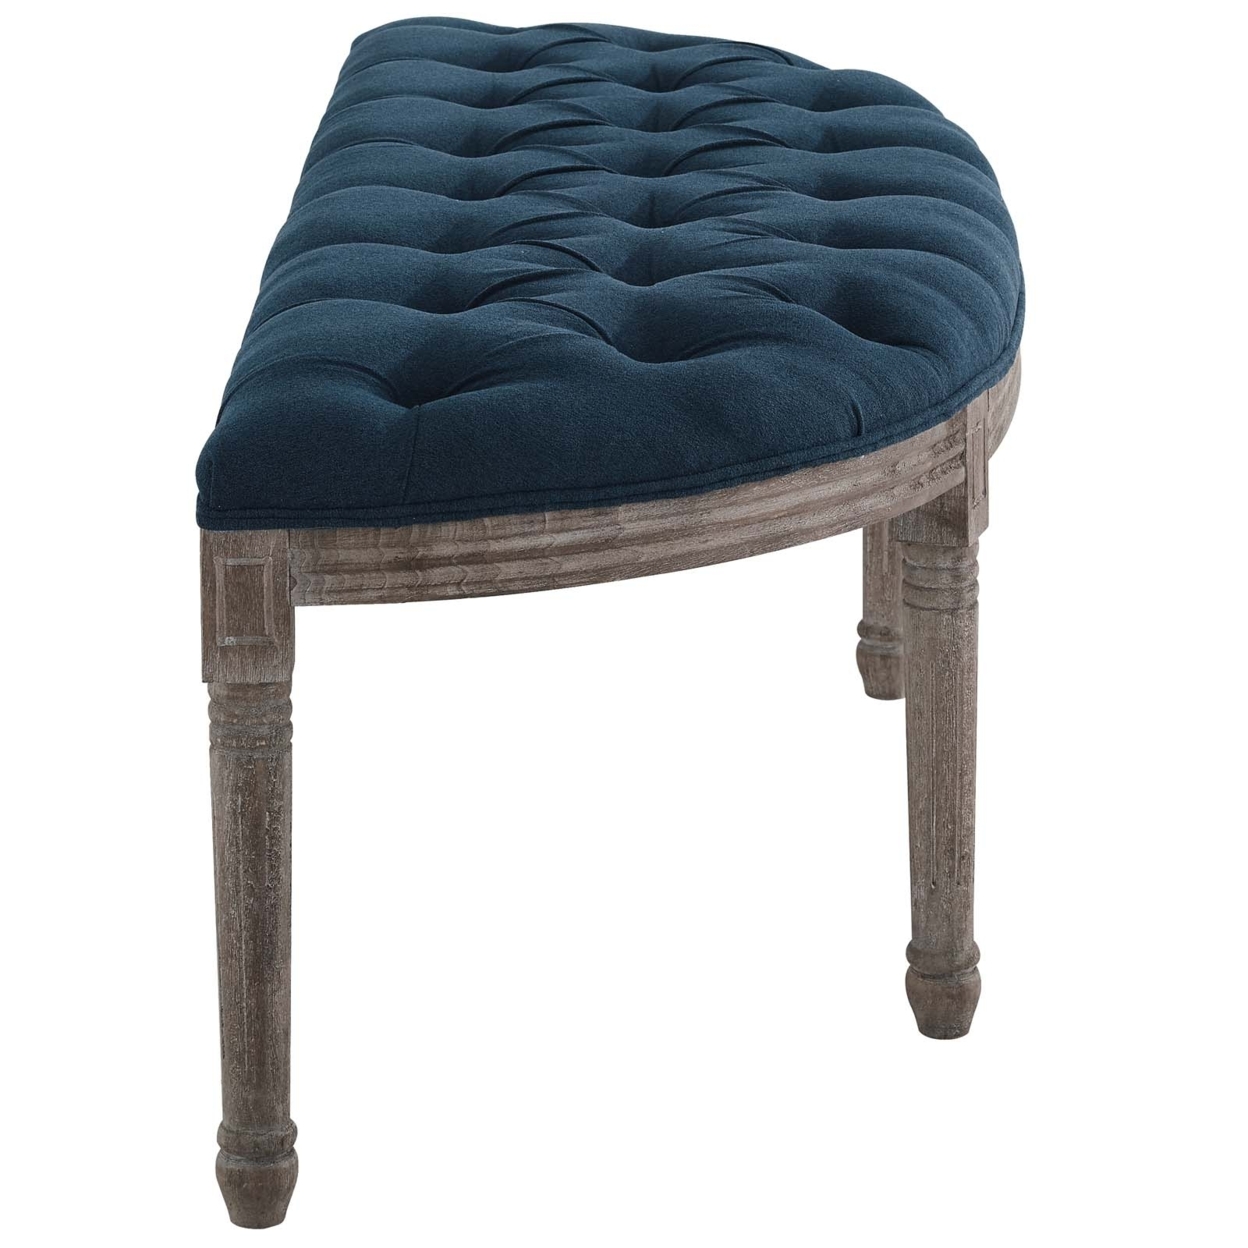 Esteem Vintage French Upholstered Fabric Semi-Circle Bench,Navy